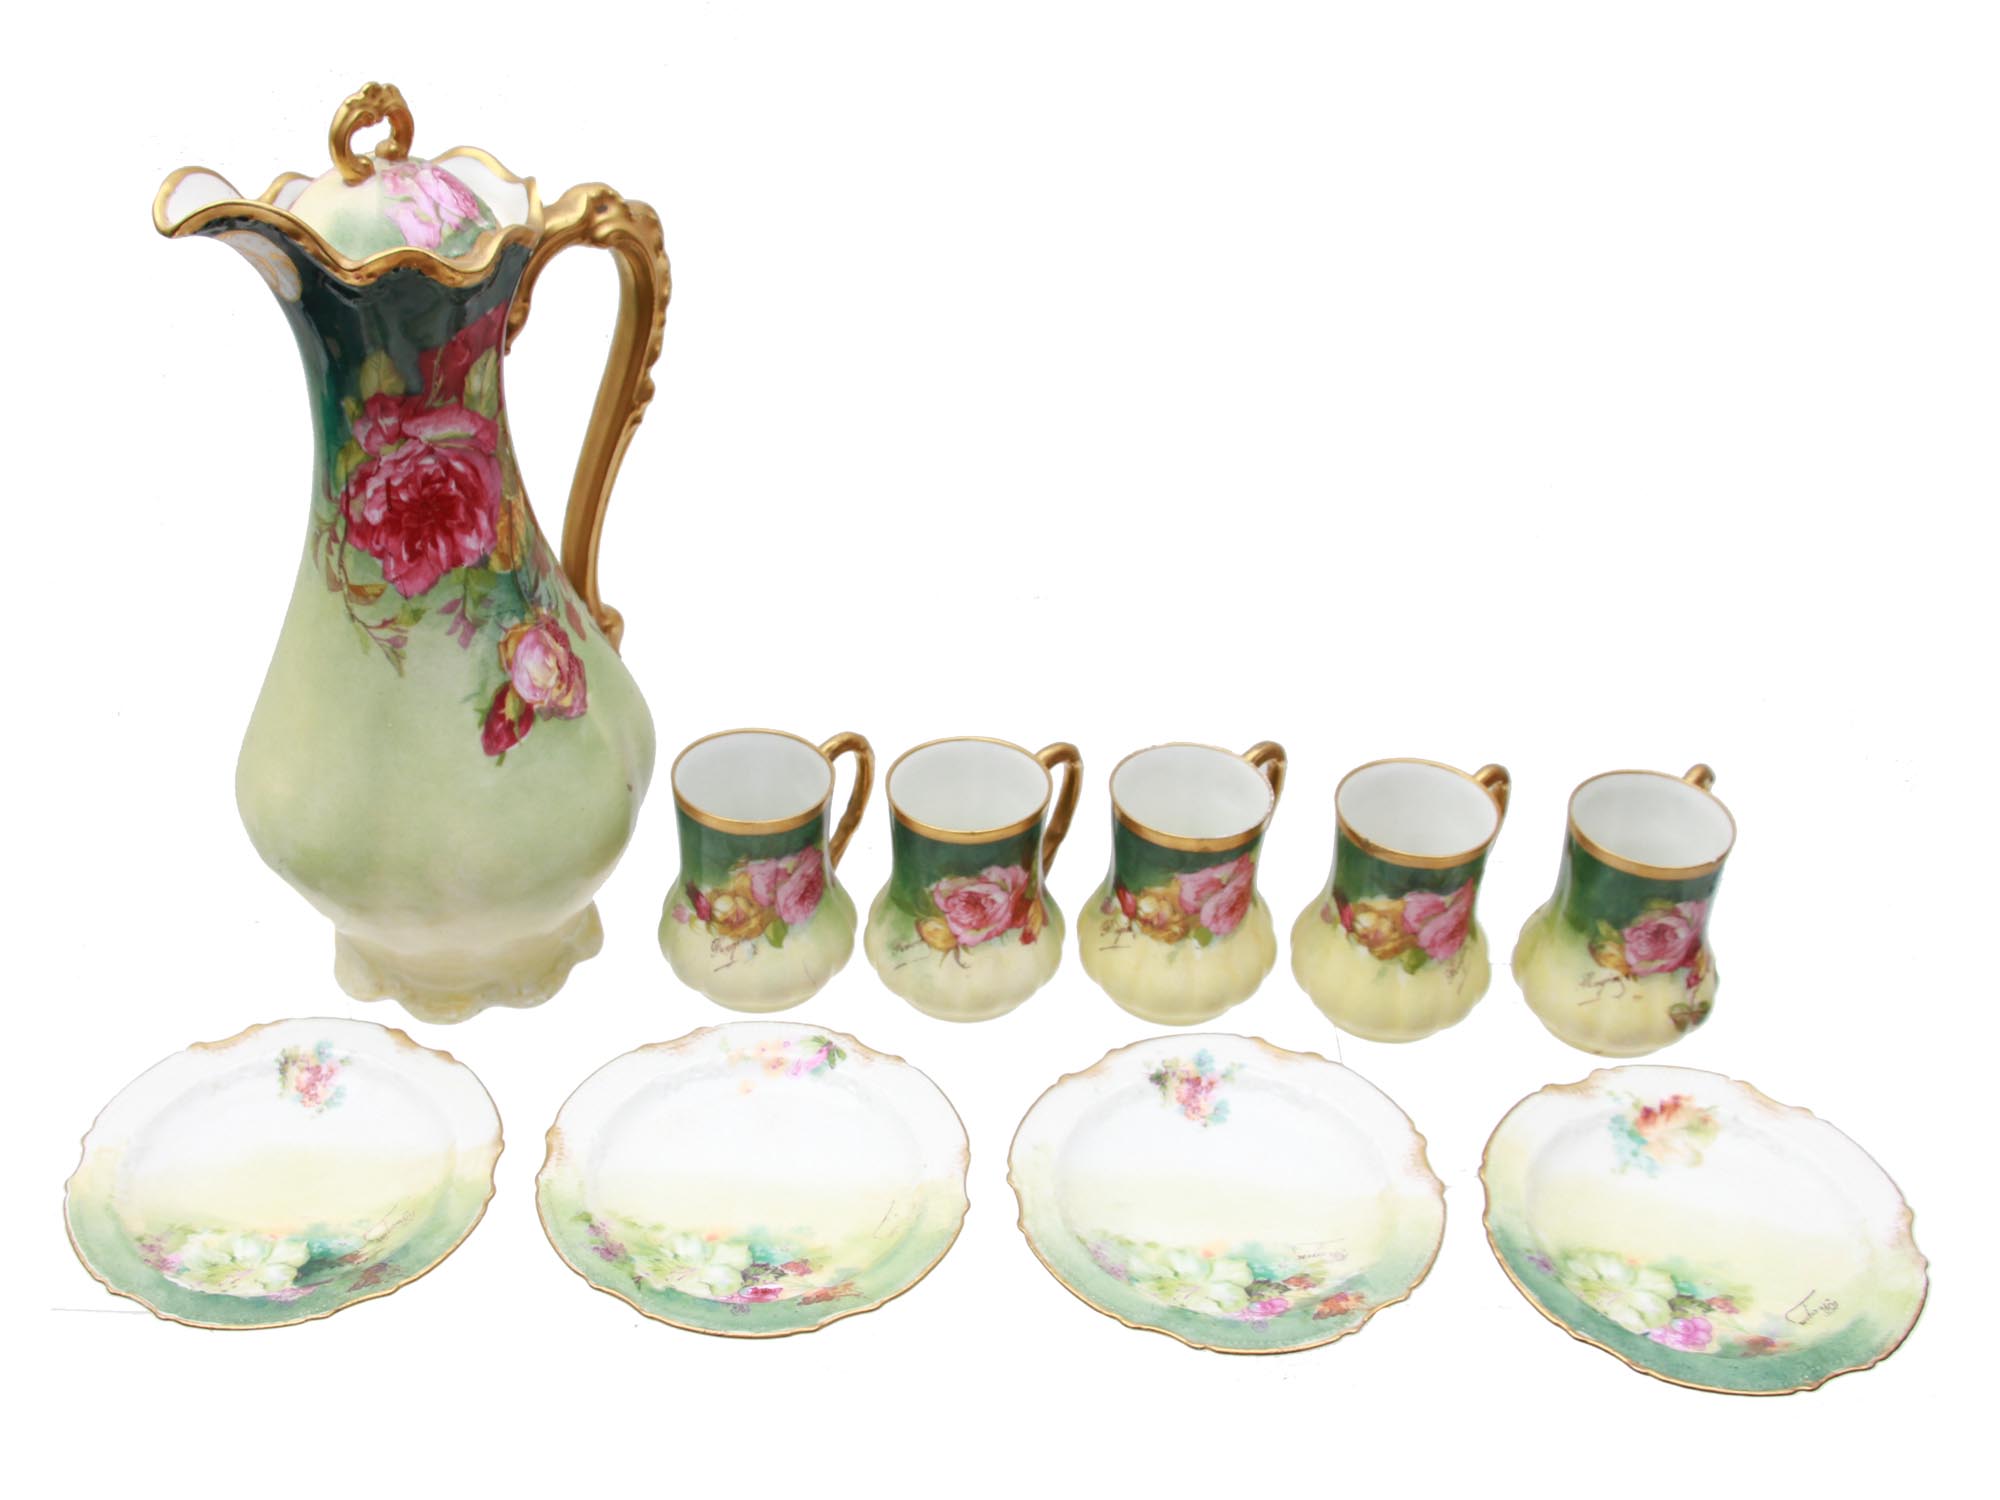 A FRENCH LIMOGES PORCELAIN FLORAL CHOCOLATE SET PIC-0